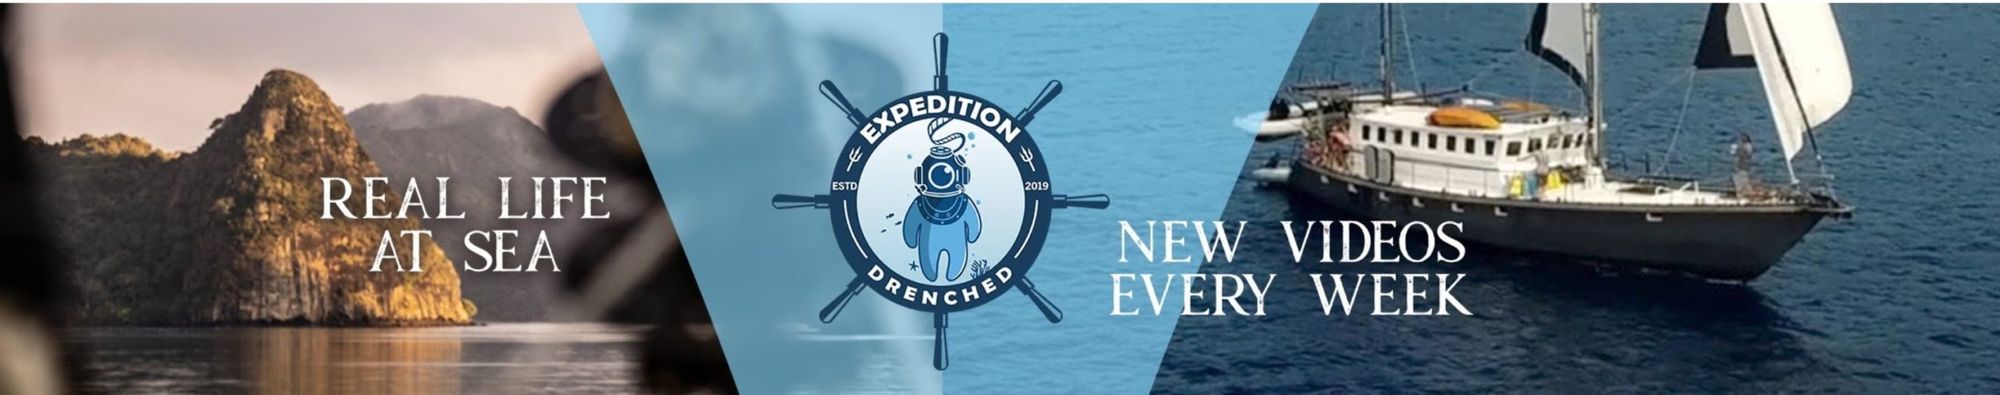 expedition drenched youtube sailing and diving channel